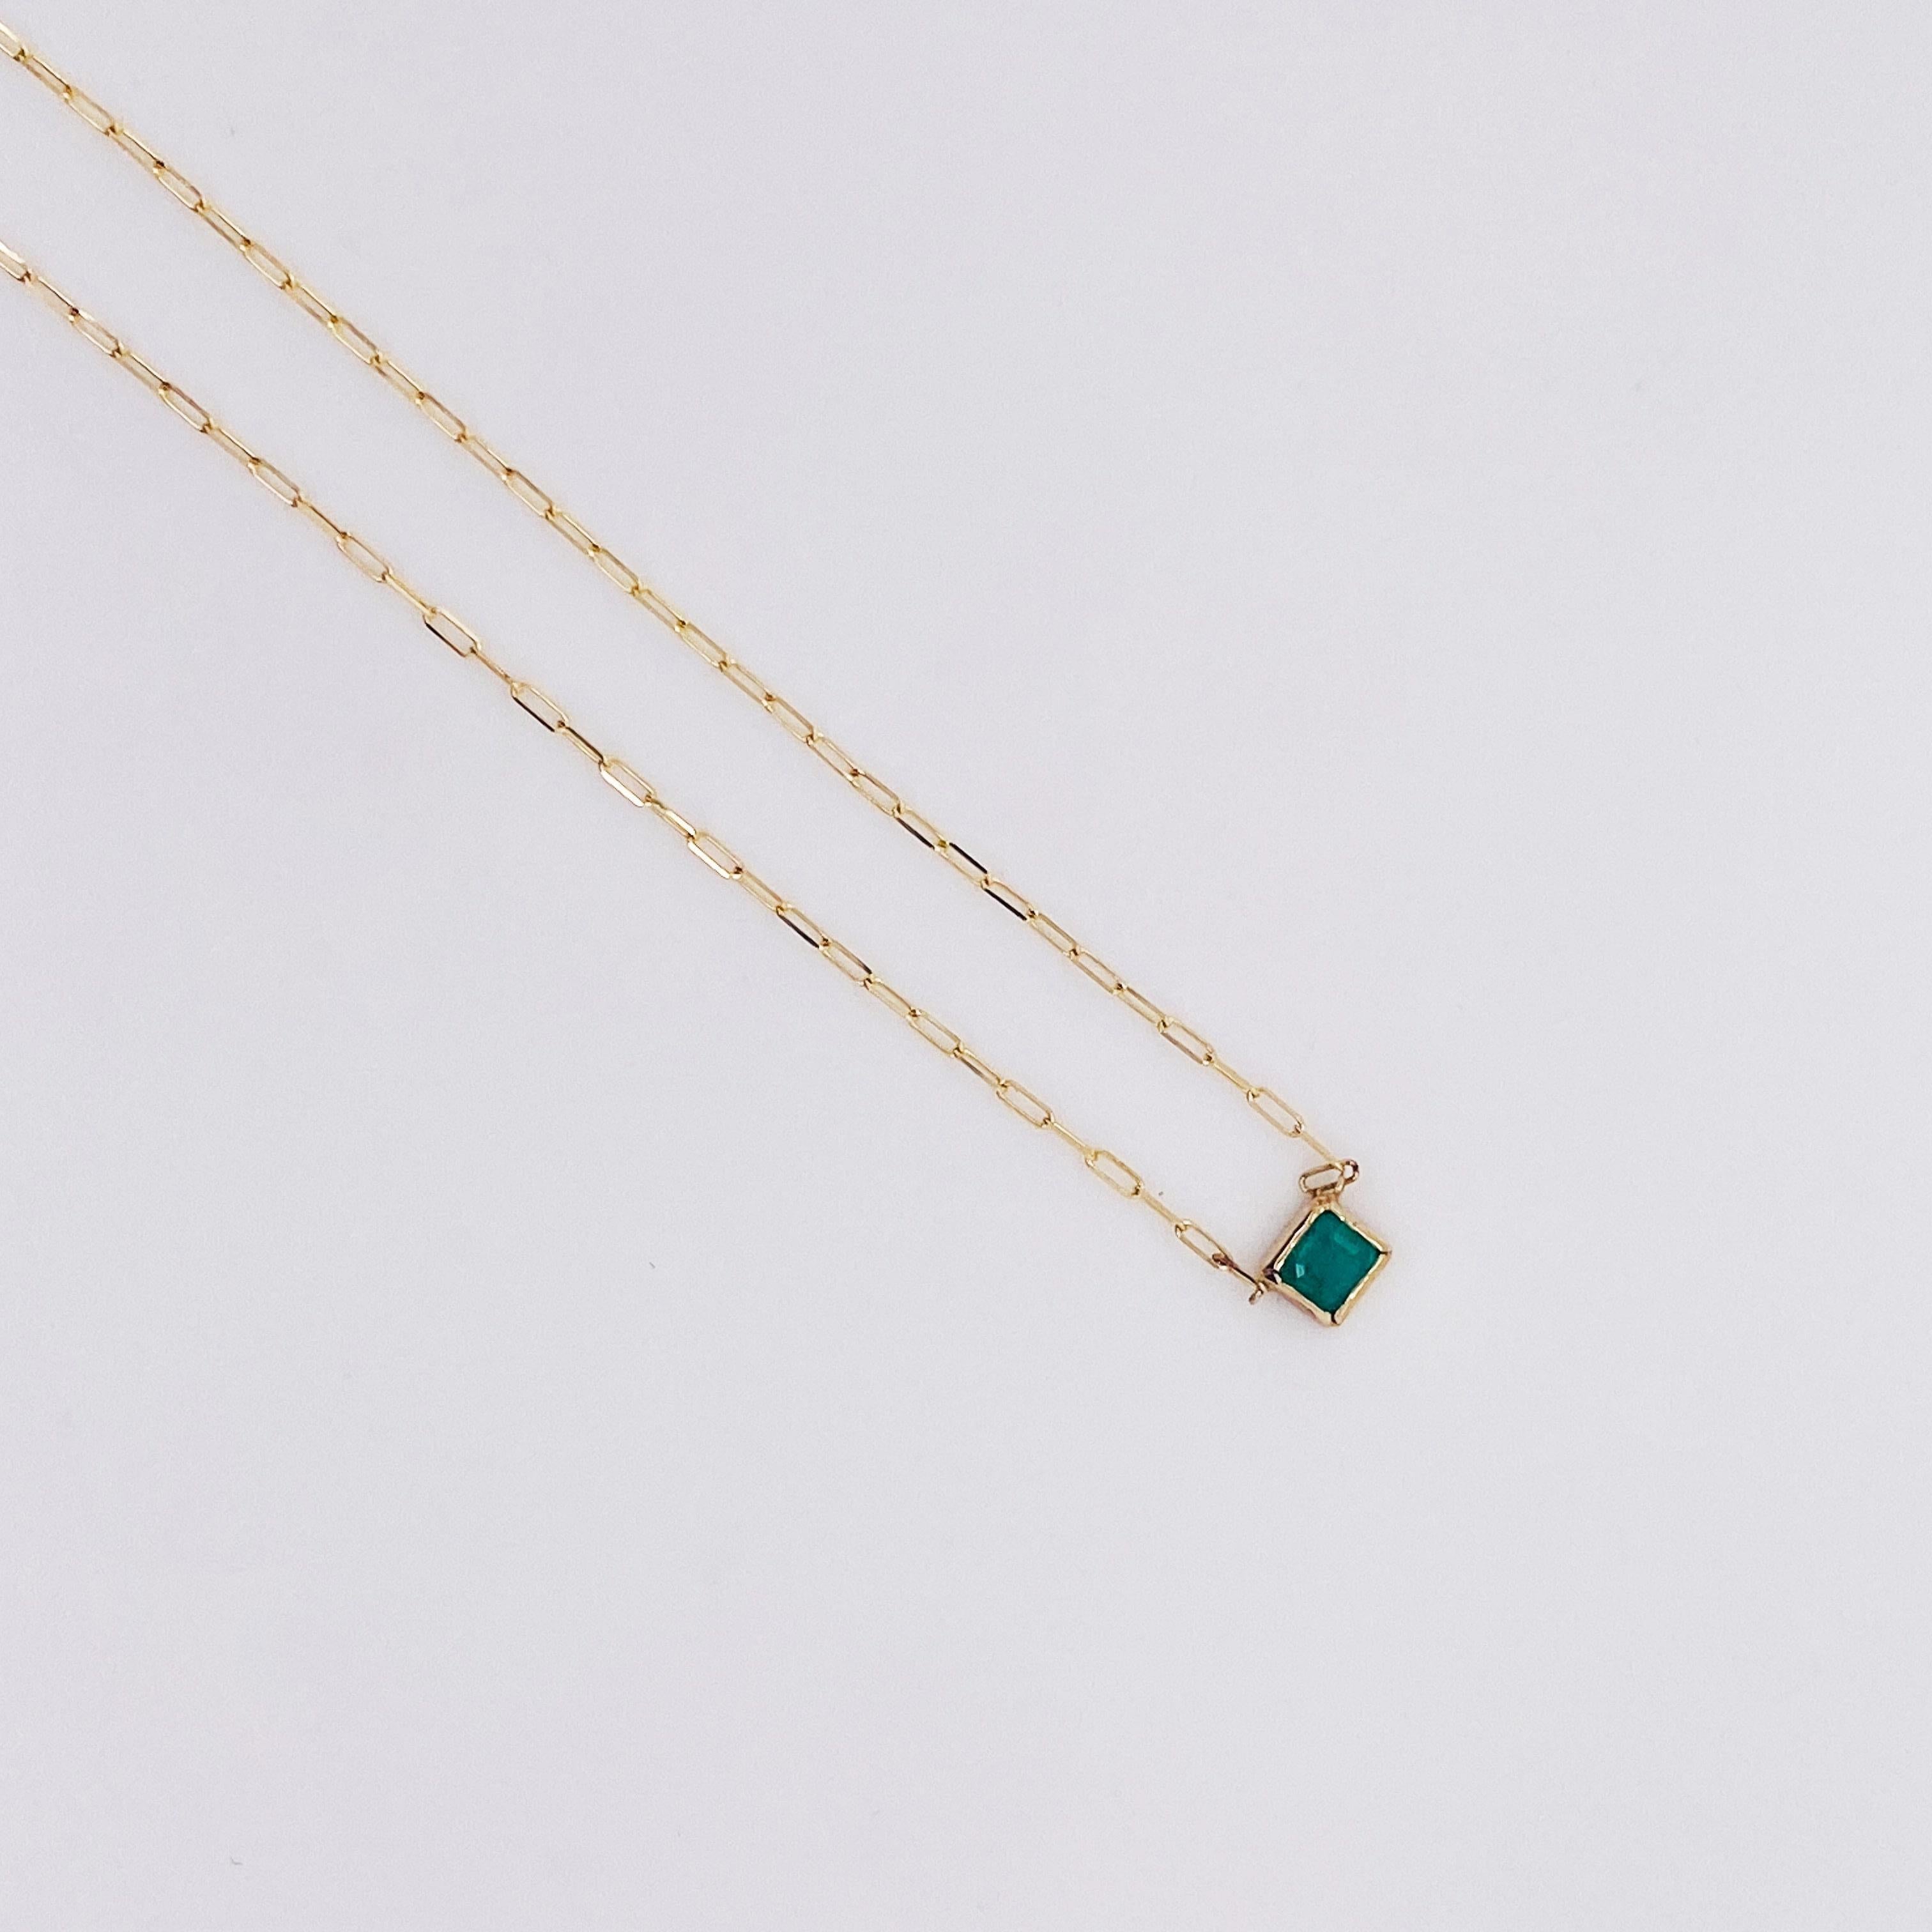 Modern Itty Bitty Emerald Necklace 0.10ct Emerald Paperclip Necklace in 14ky Gold